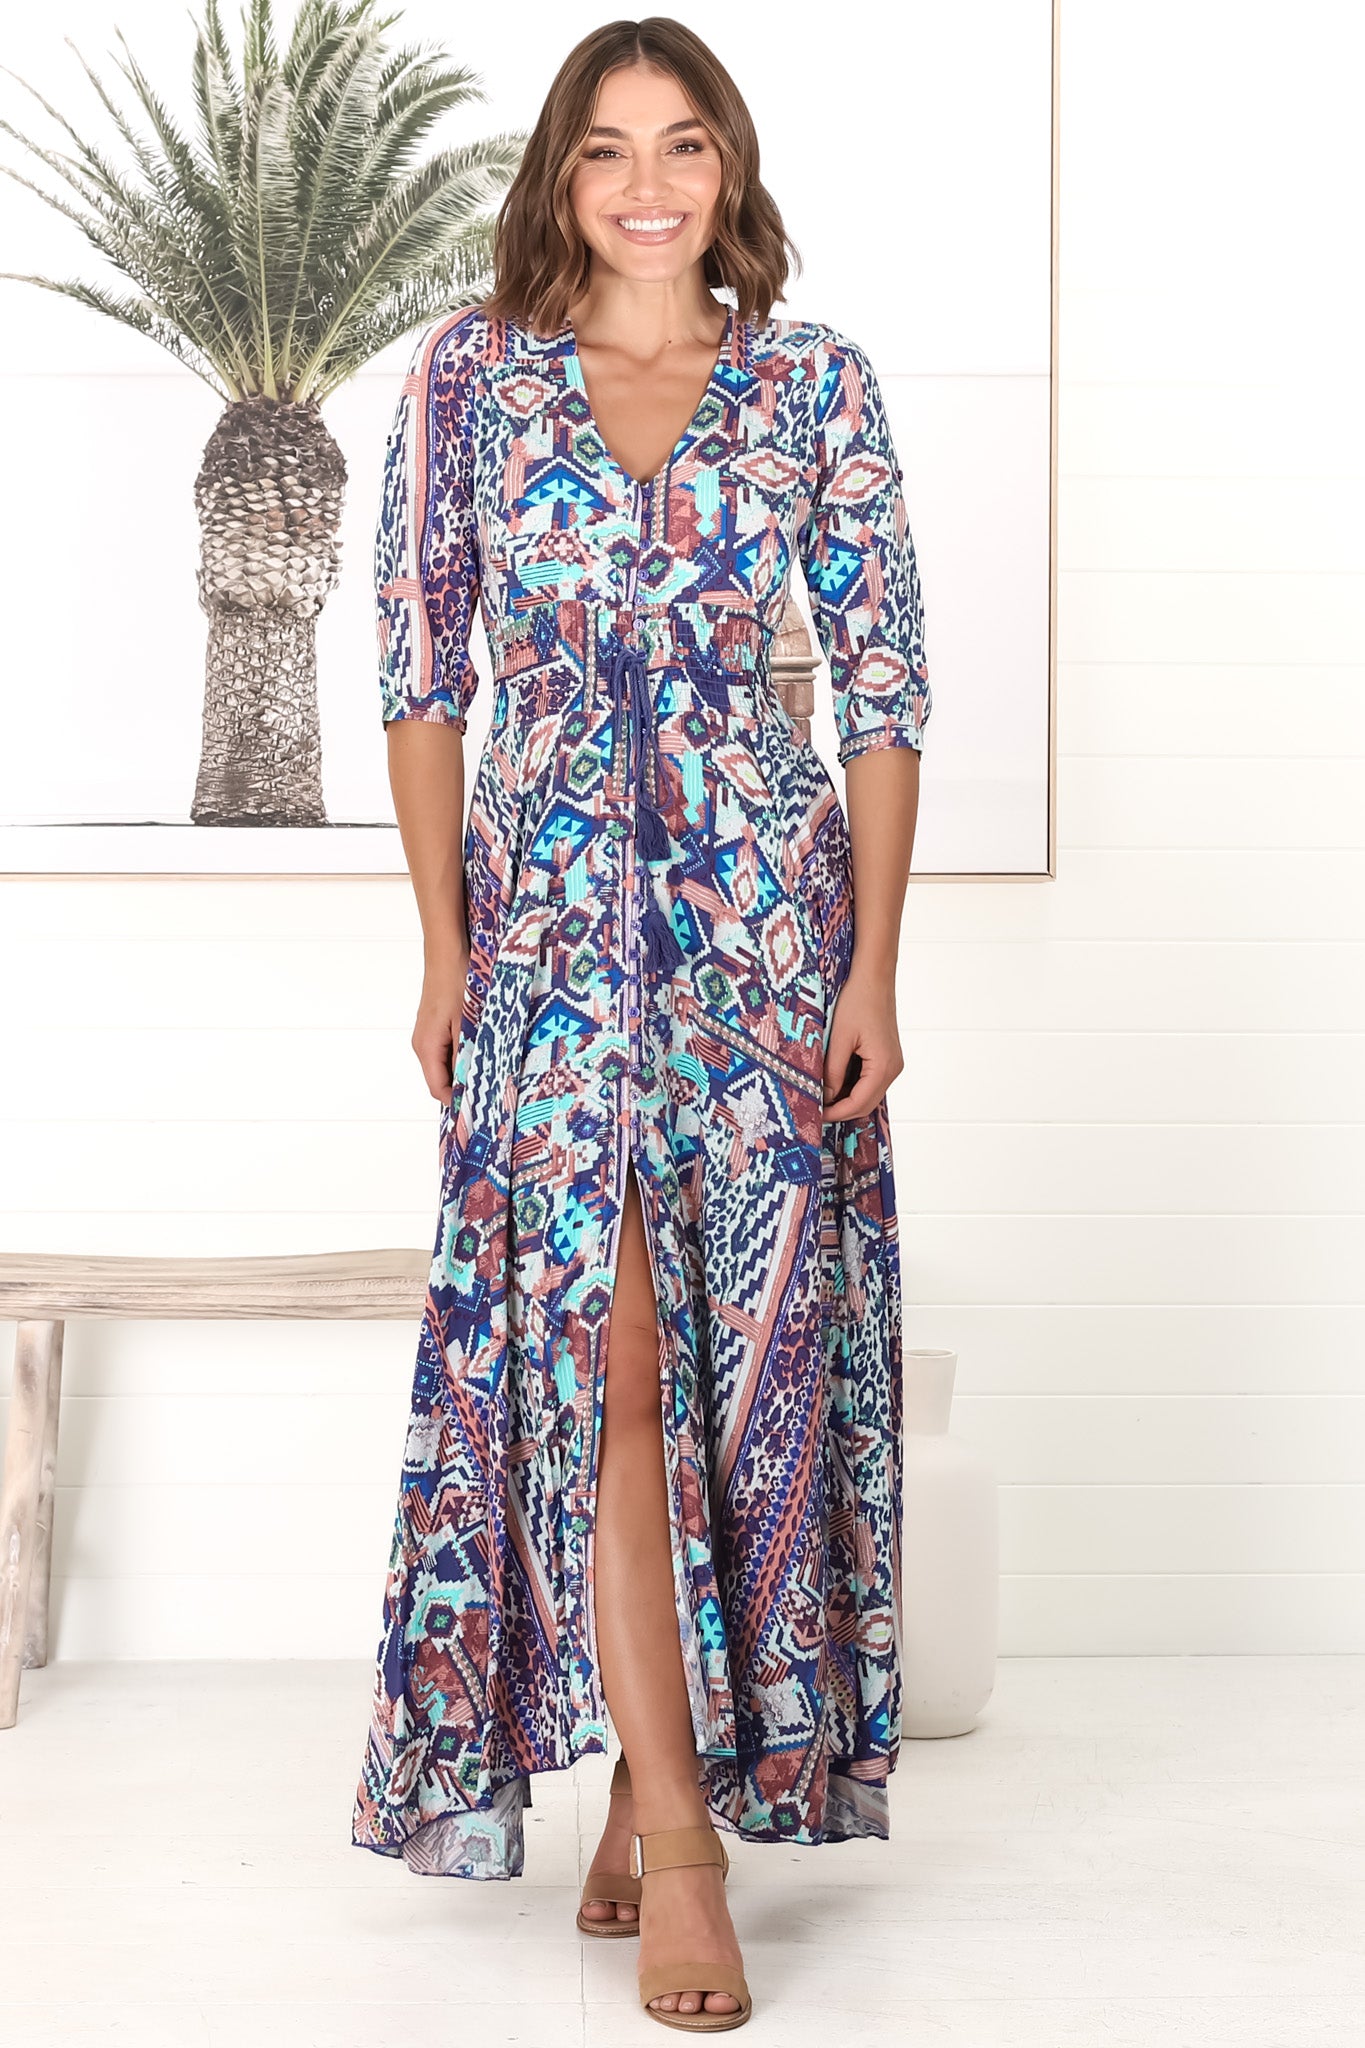 JAASE - Indiana Maxi Dress: Lace Back Shirred Waist A Line Dress with Handkercheif Hemline in Norah Print